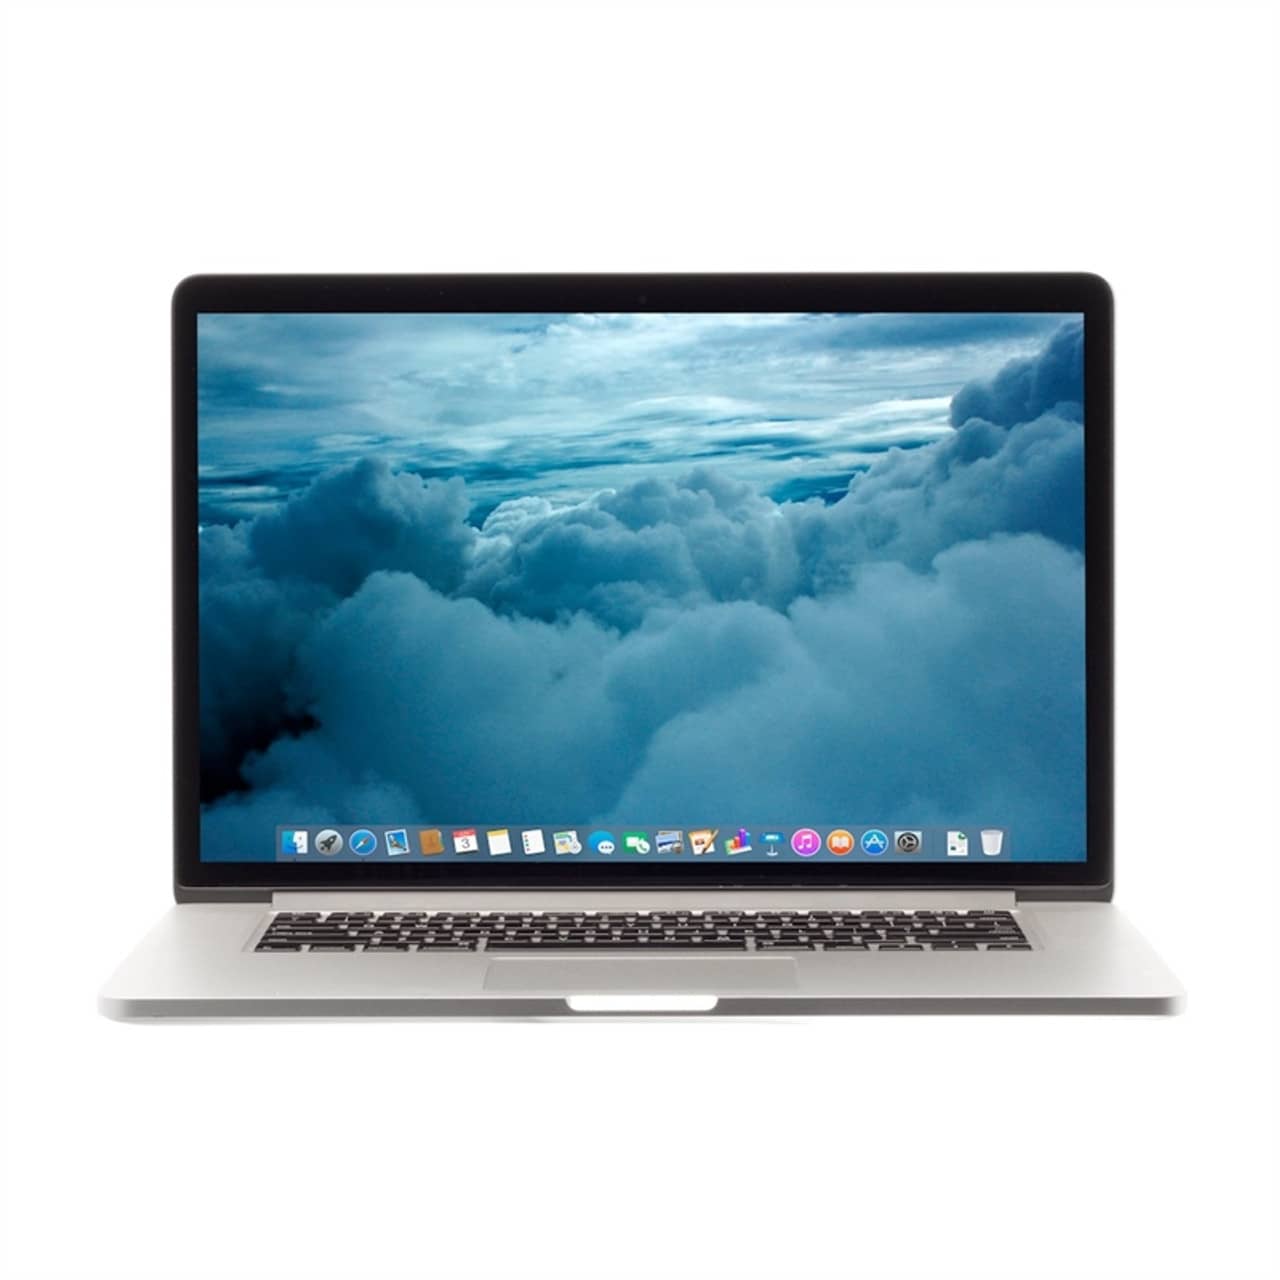 Apple MacBook Pro Retina 15 inch Mid 2012 Technical Specifications